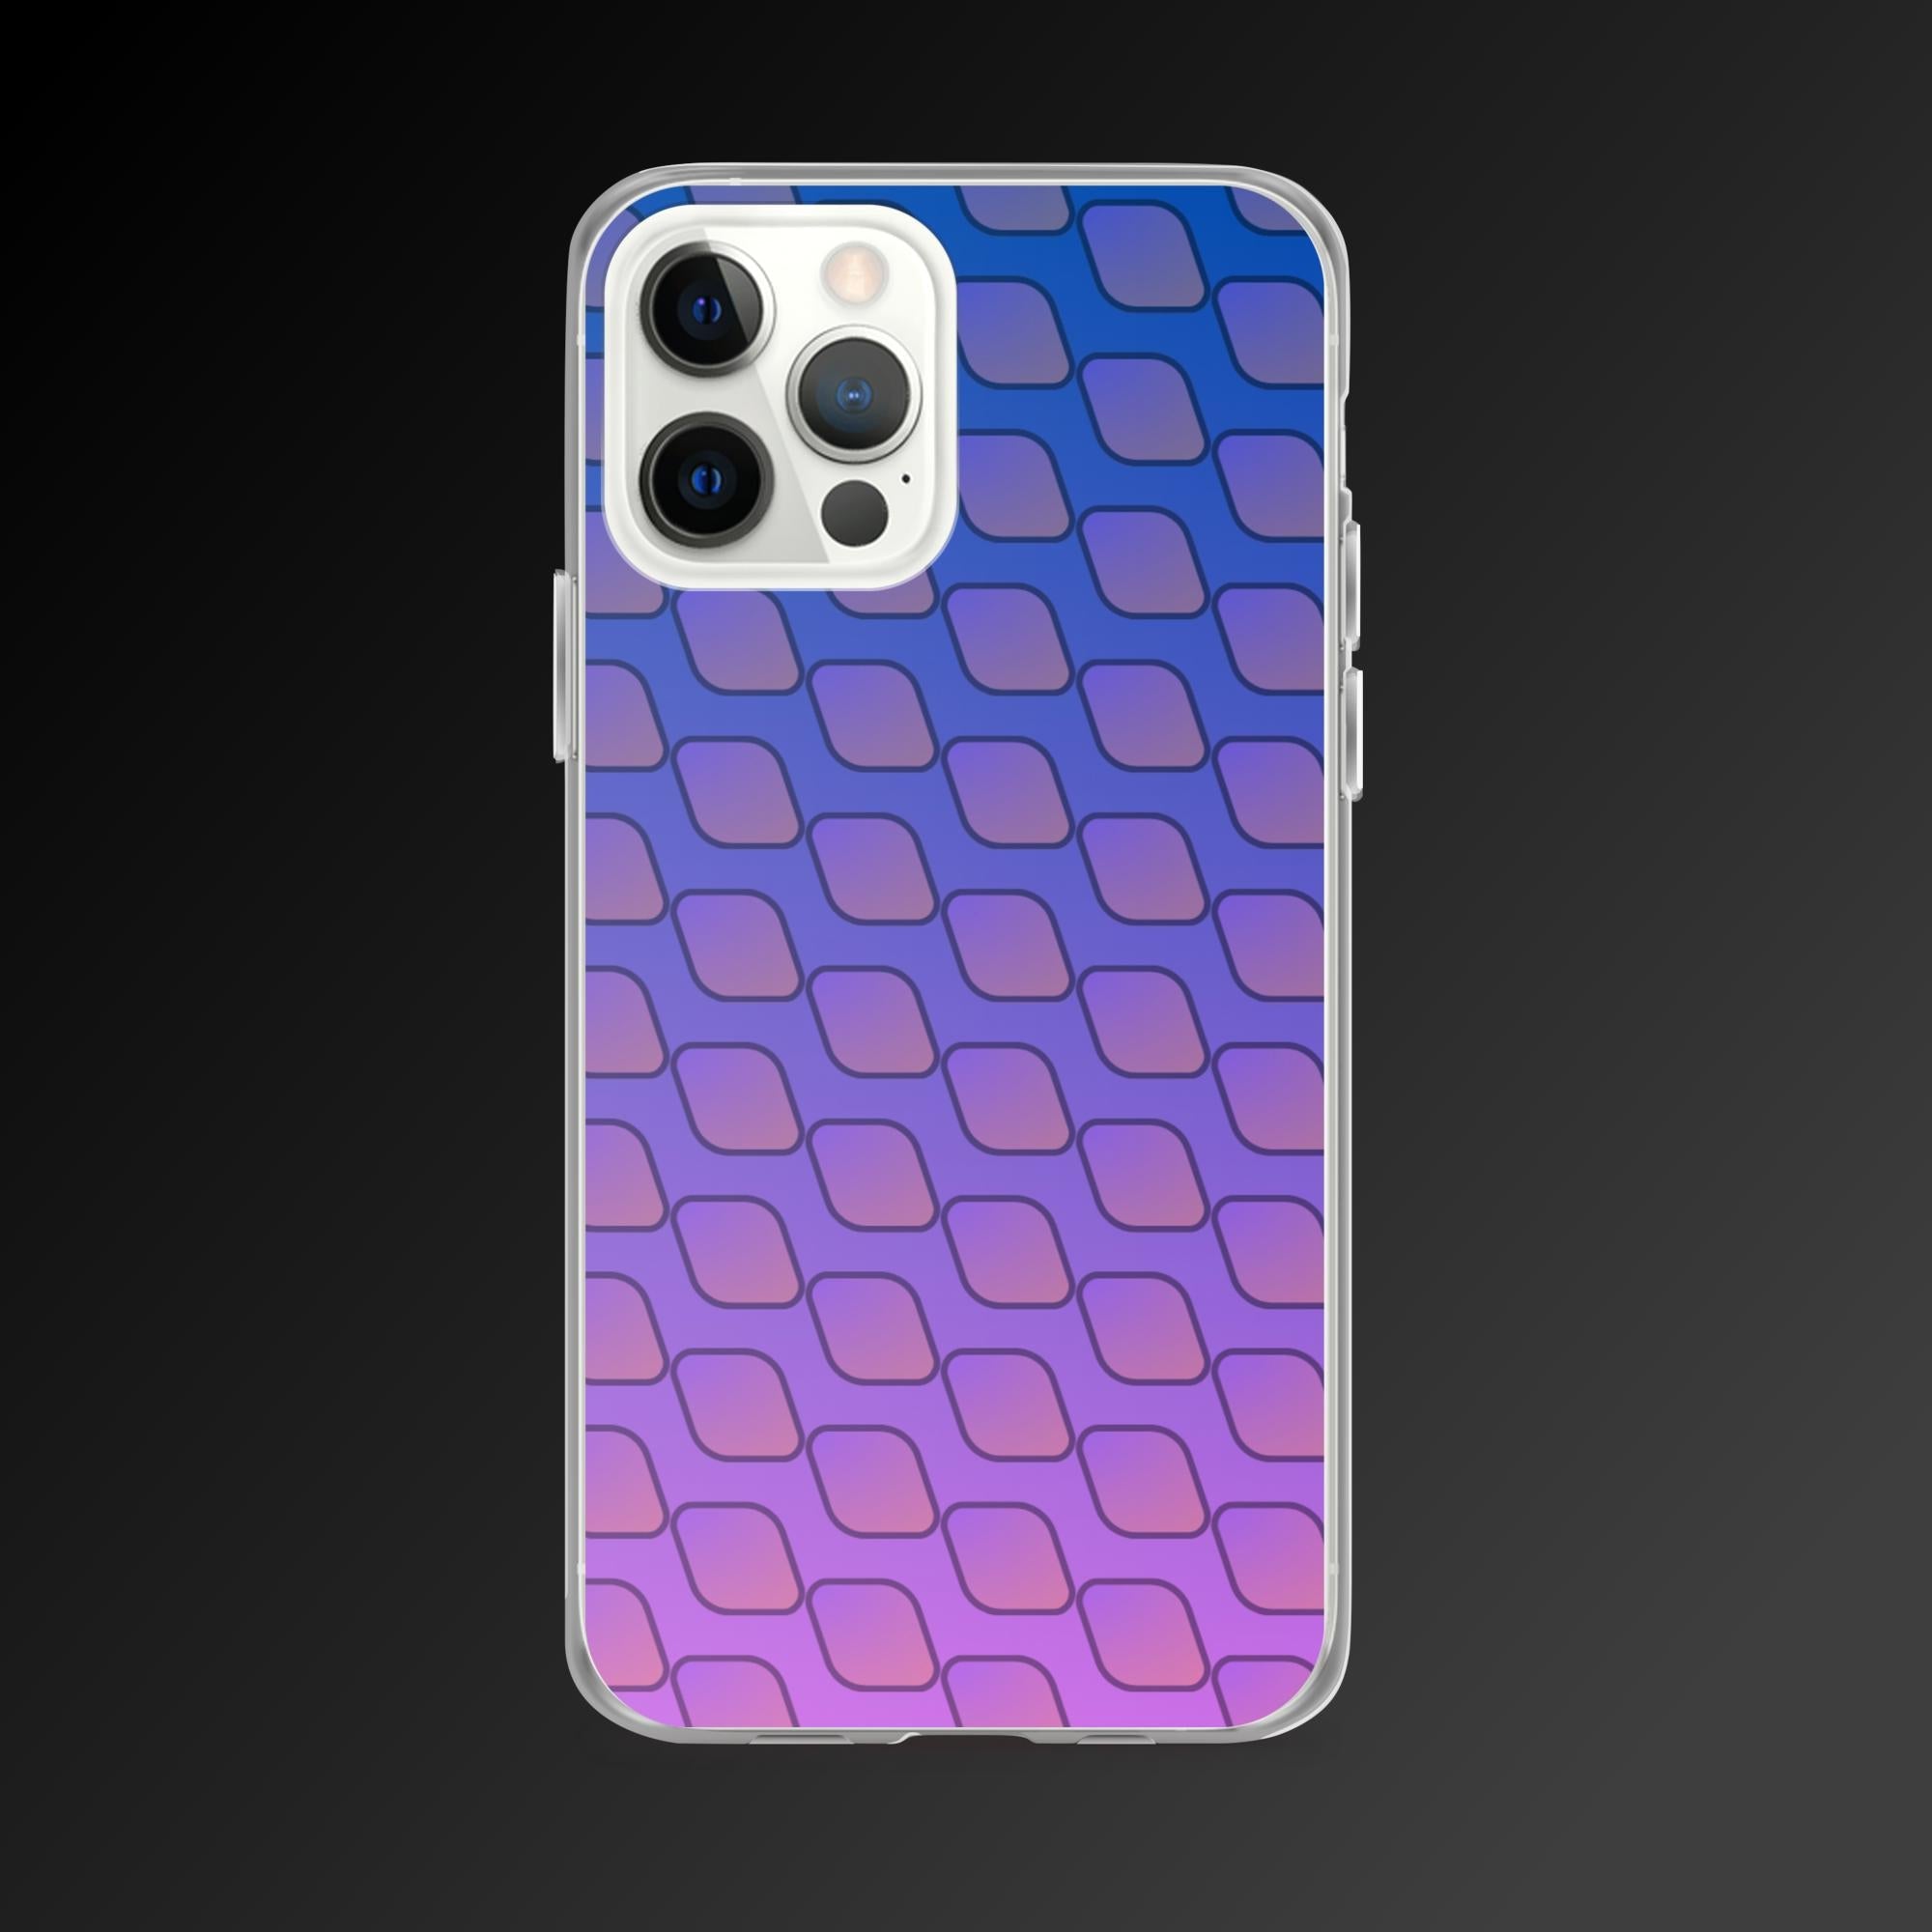 "Diamonds pattern" clear iphone case - Clear iphone case - Ever colorful